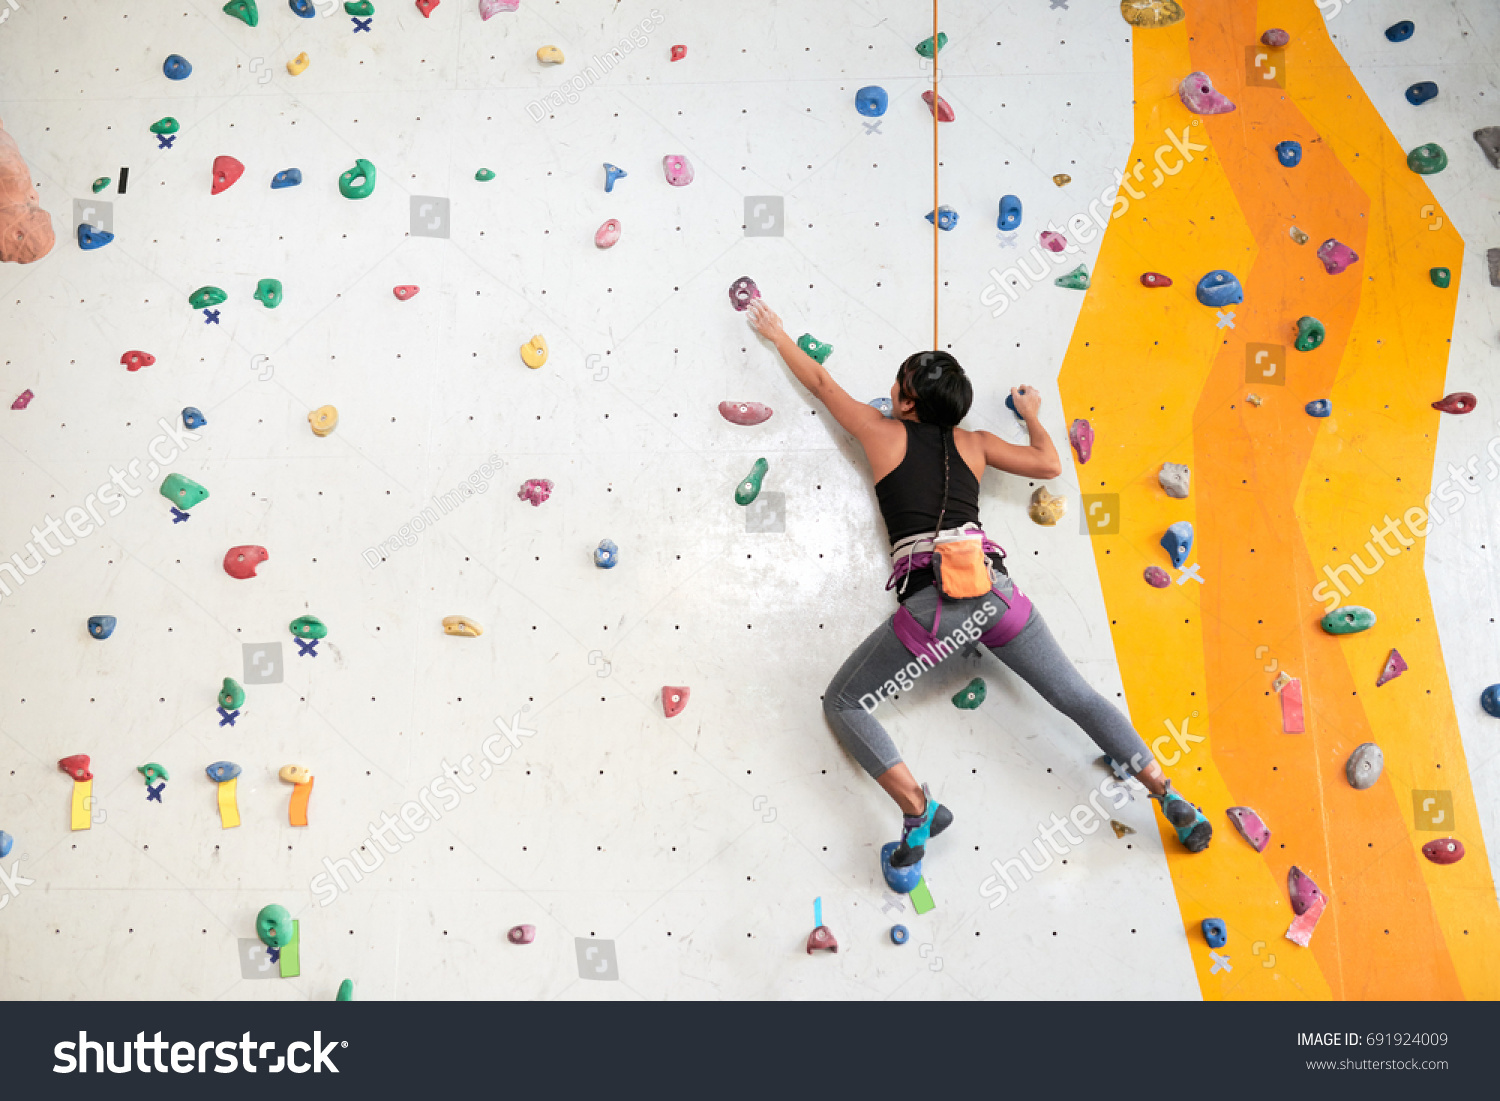 Woman climbing on the wall, view from the back #691924009